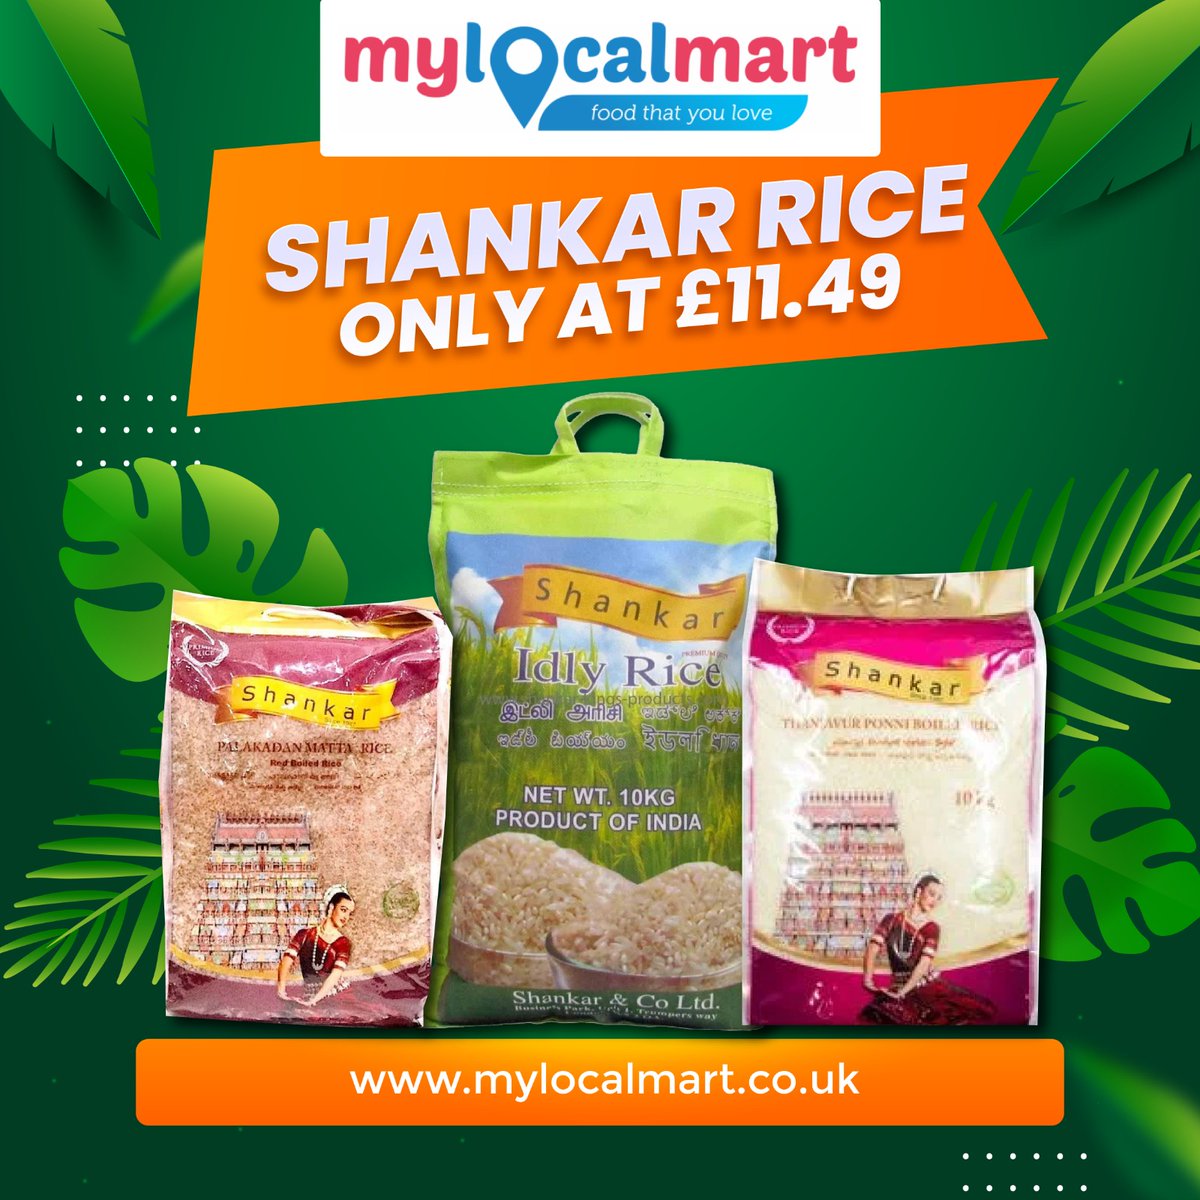 Shankar Rice 10kg Bag is just at £11.49

Grab the offer as soon as you can!

mylocalmart.co.uk/shanker

#IndianSnack #GoodOFood #GoodOFoodUK #ukgrocerystore #ukgroceries #ukgroceryshopper #IndianSpices #Spices #SouthIndianRecipes